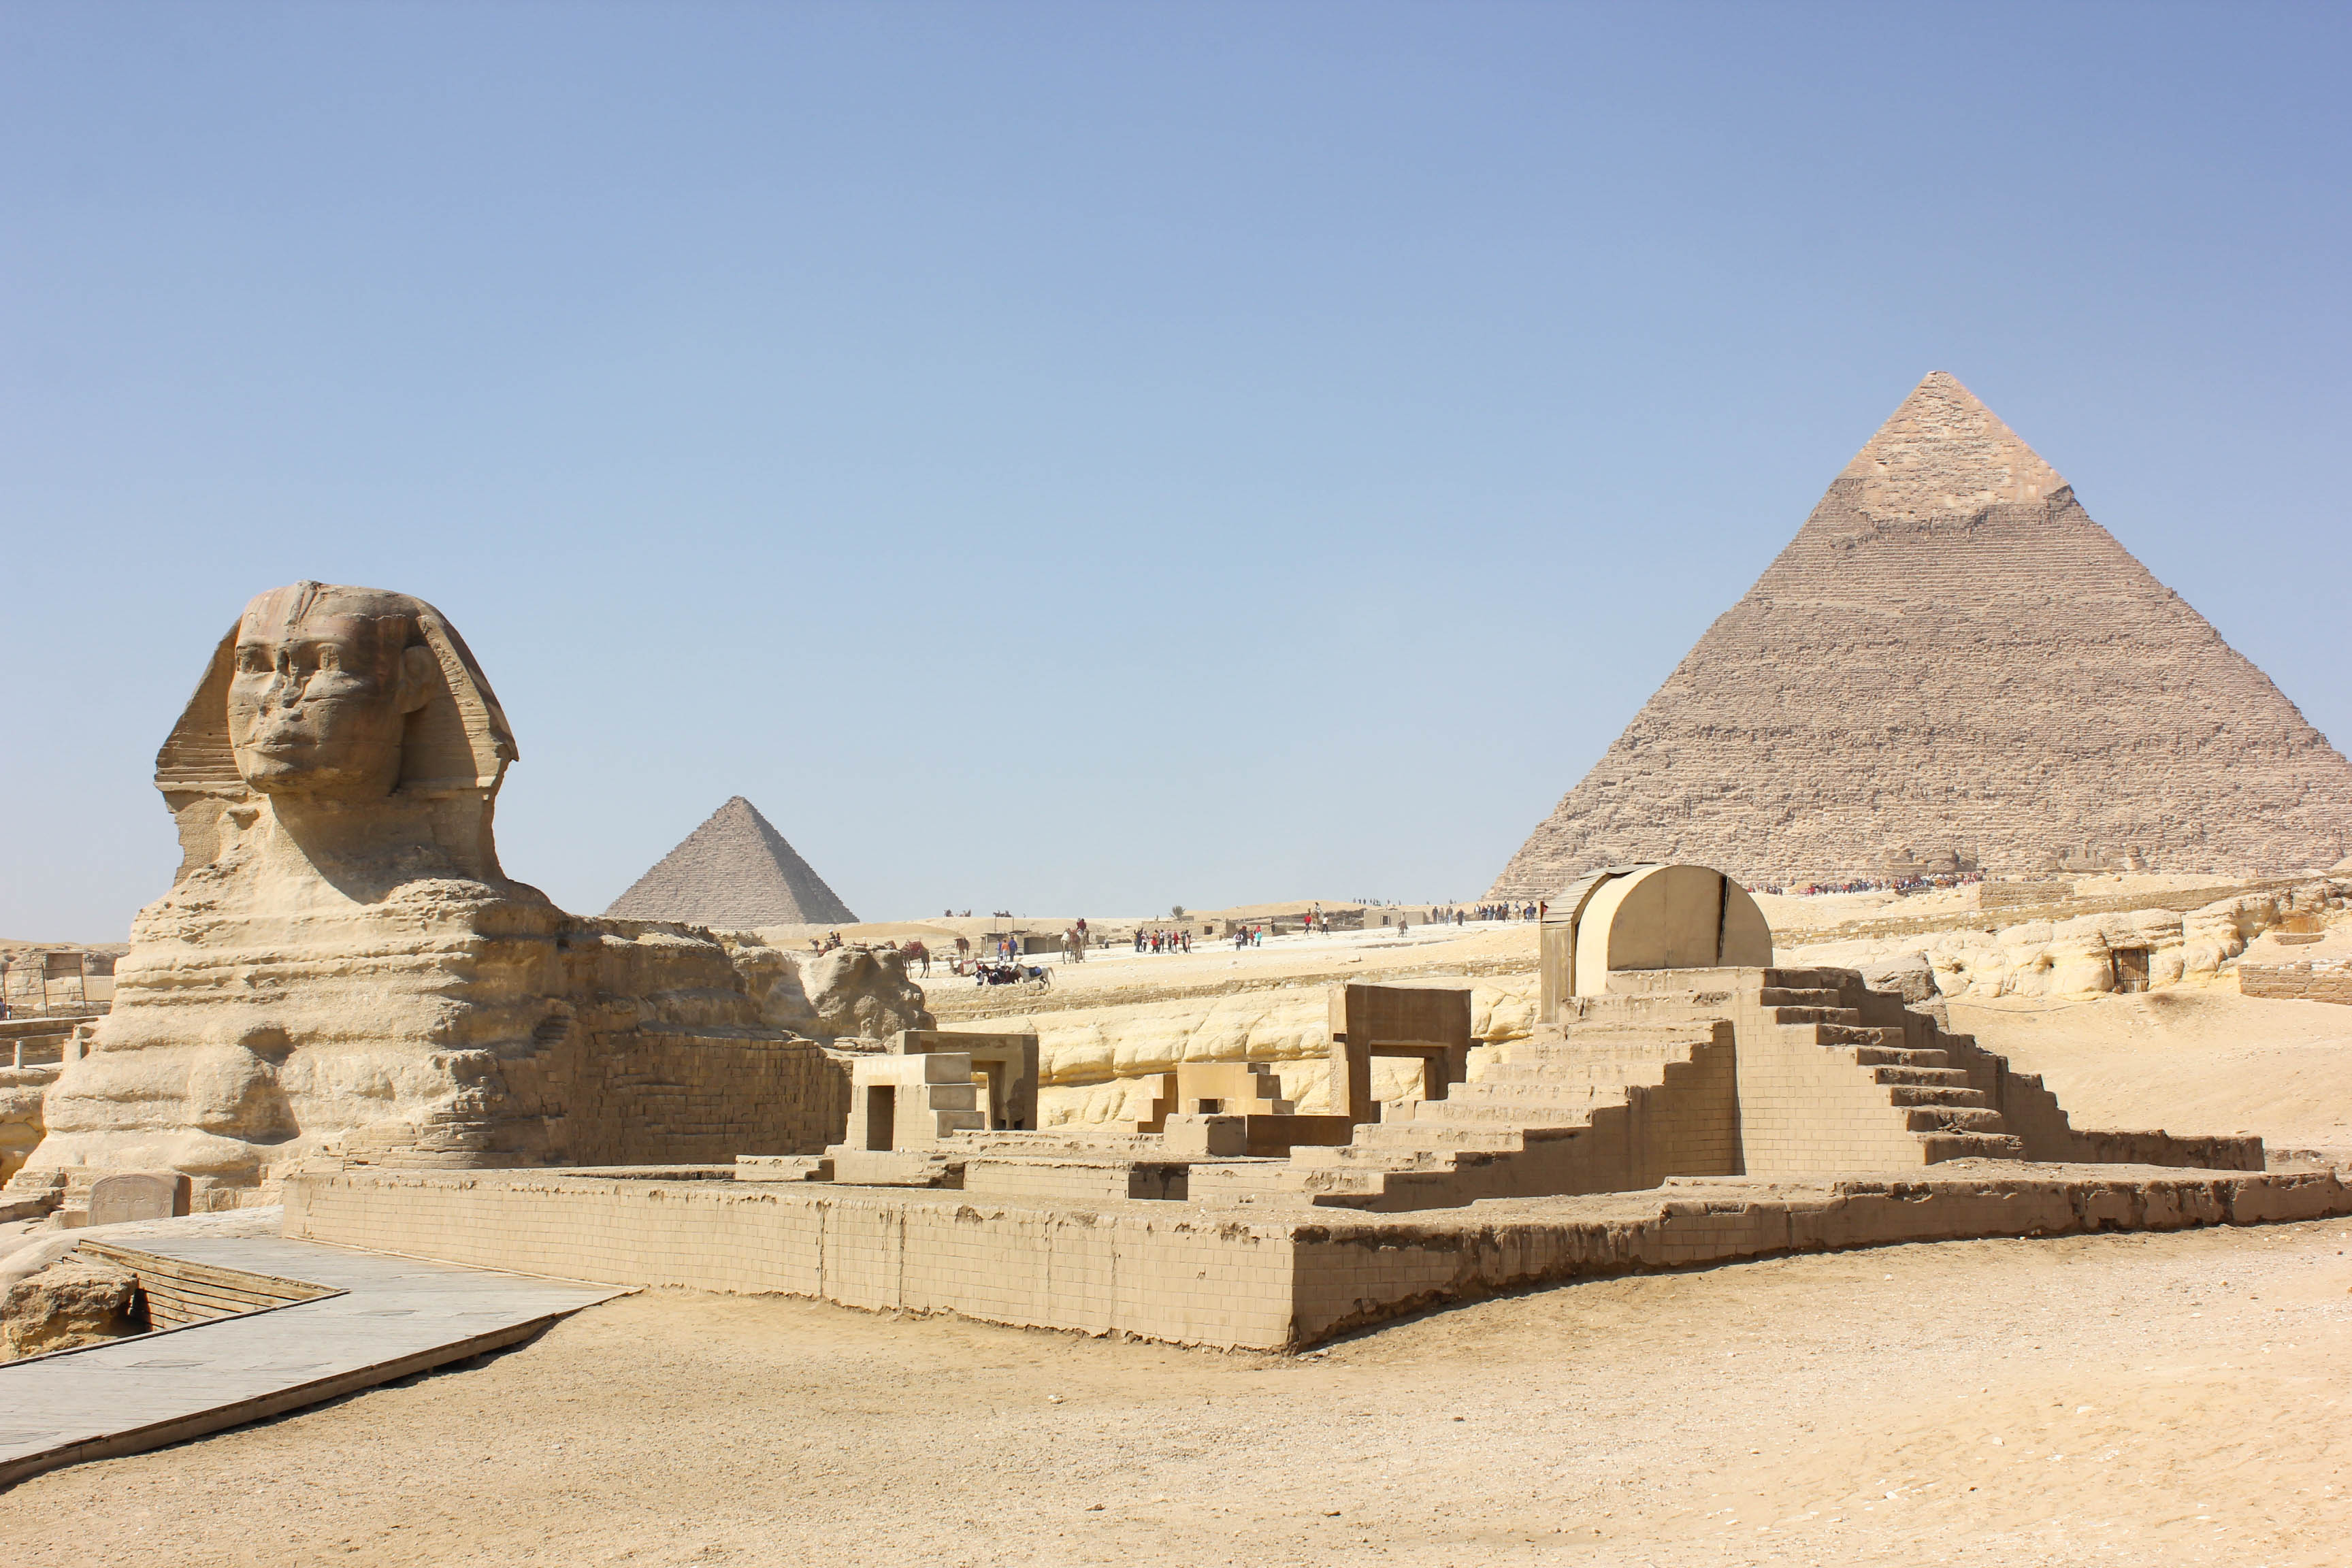 Pyramids and Sculpture of Old Kingdom Egypt – Brewminate: A Bold Blend